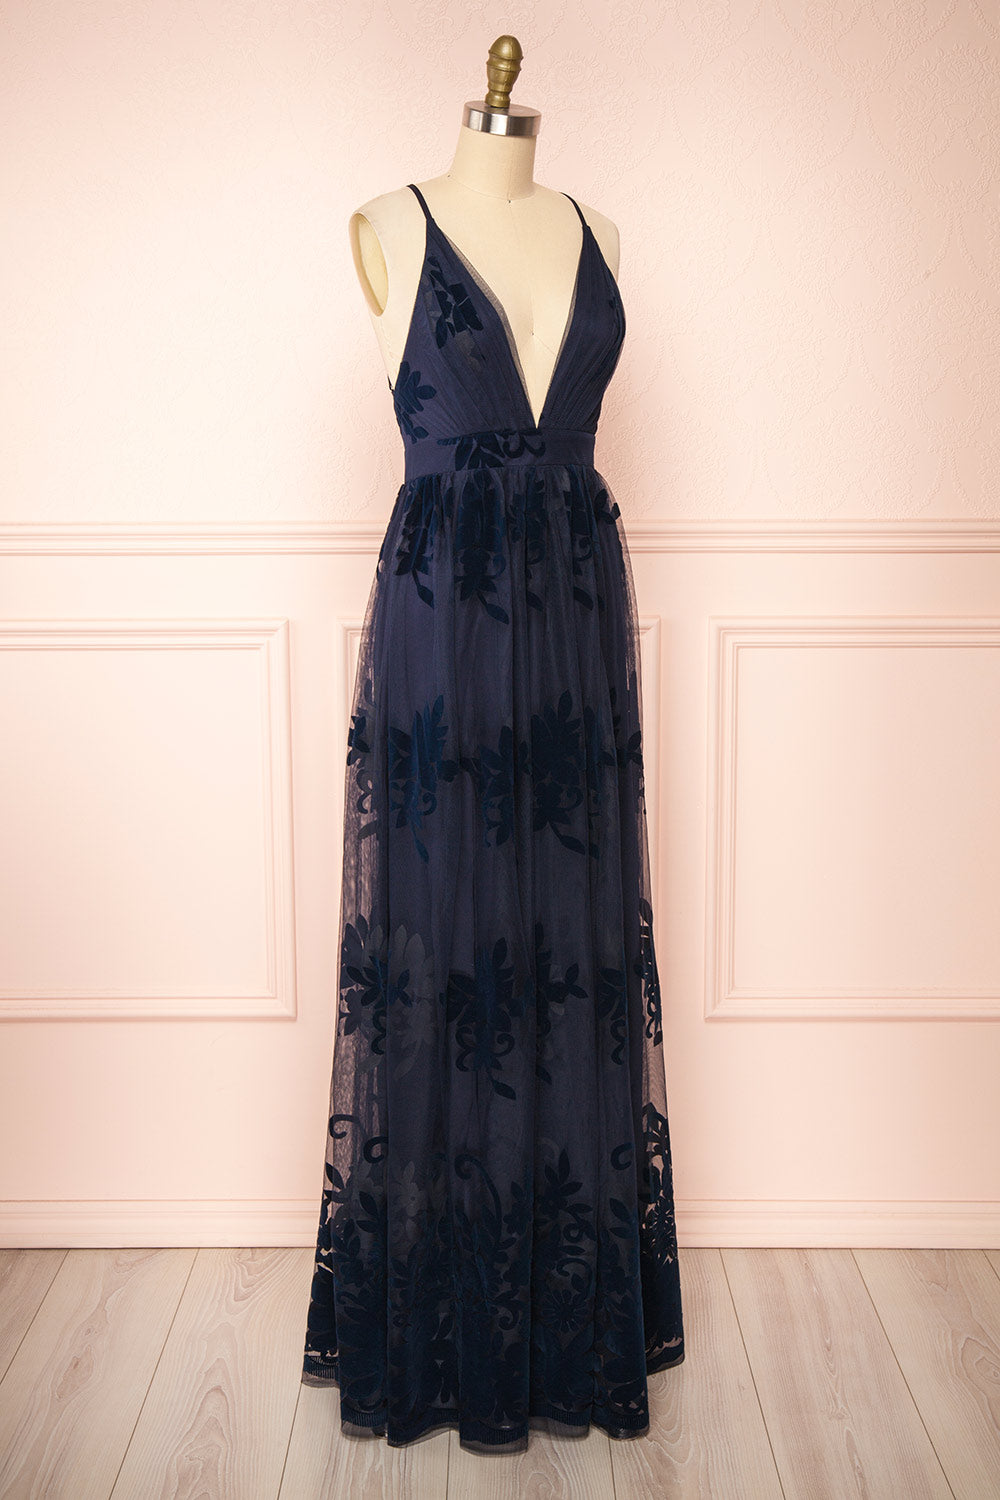 Kailania Navy Plunging Neckline Mesh Maxi Gown | Boudoir 1861 side view